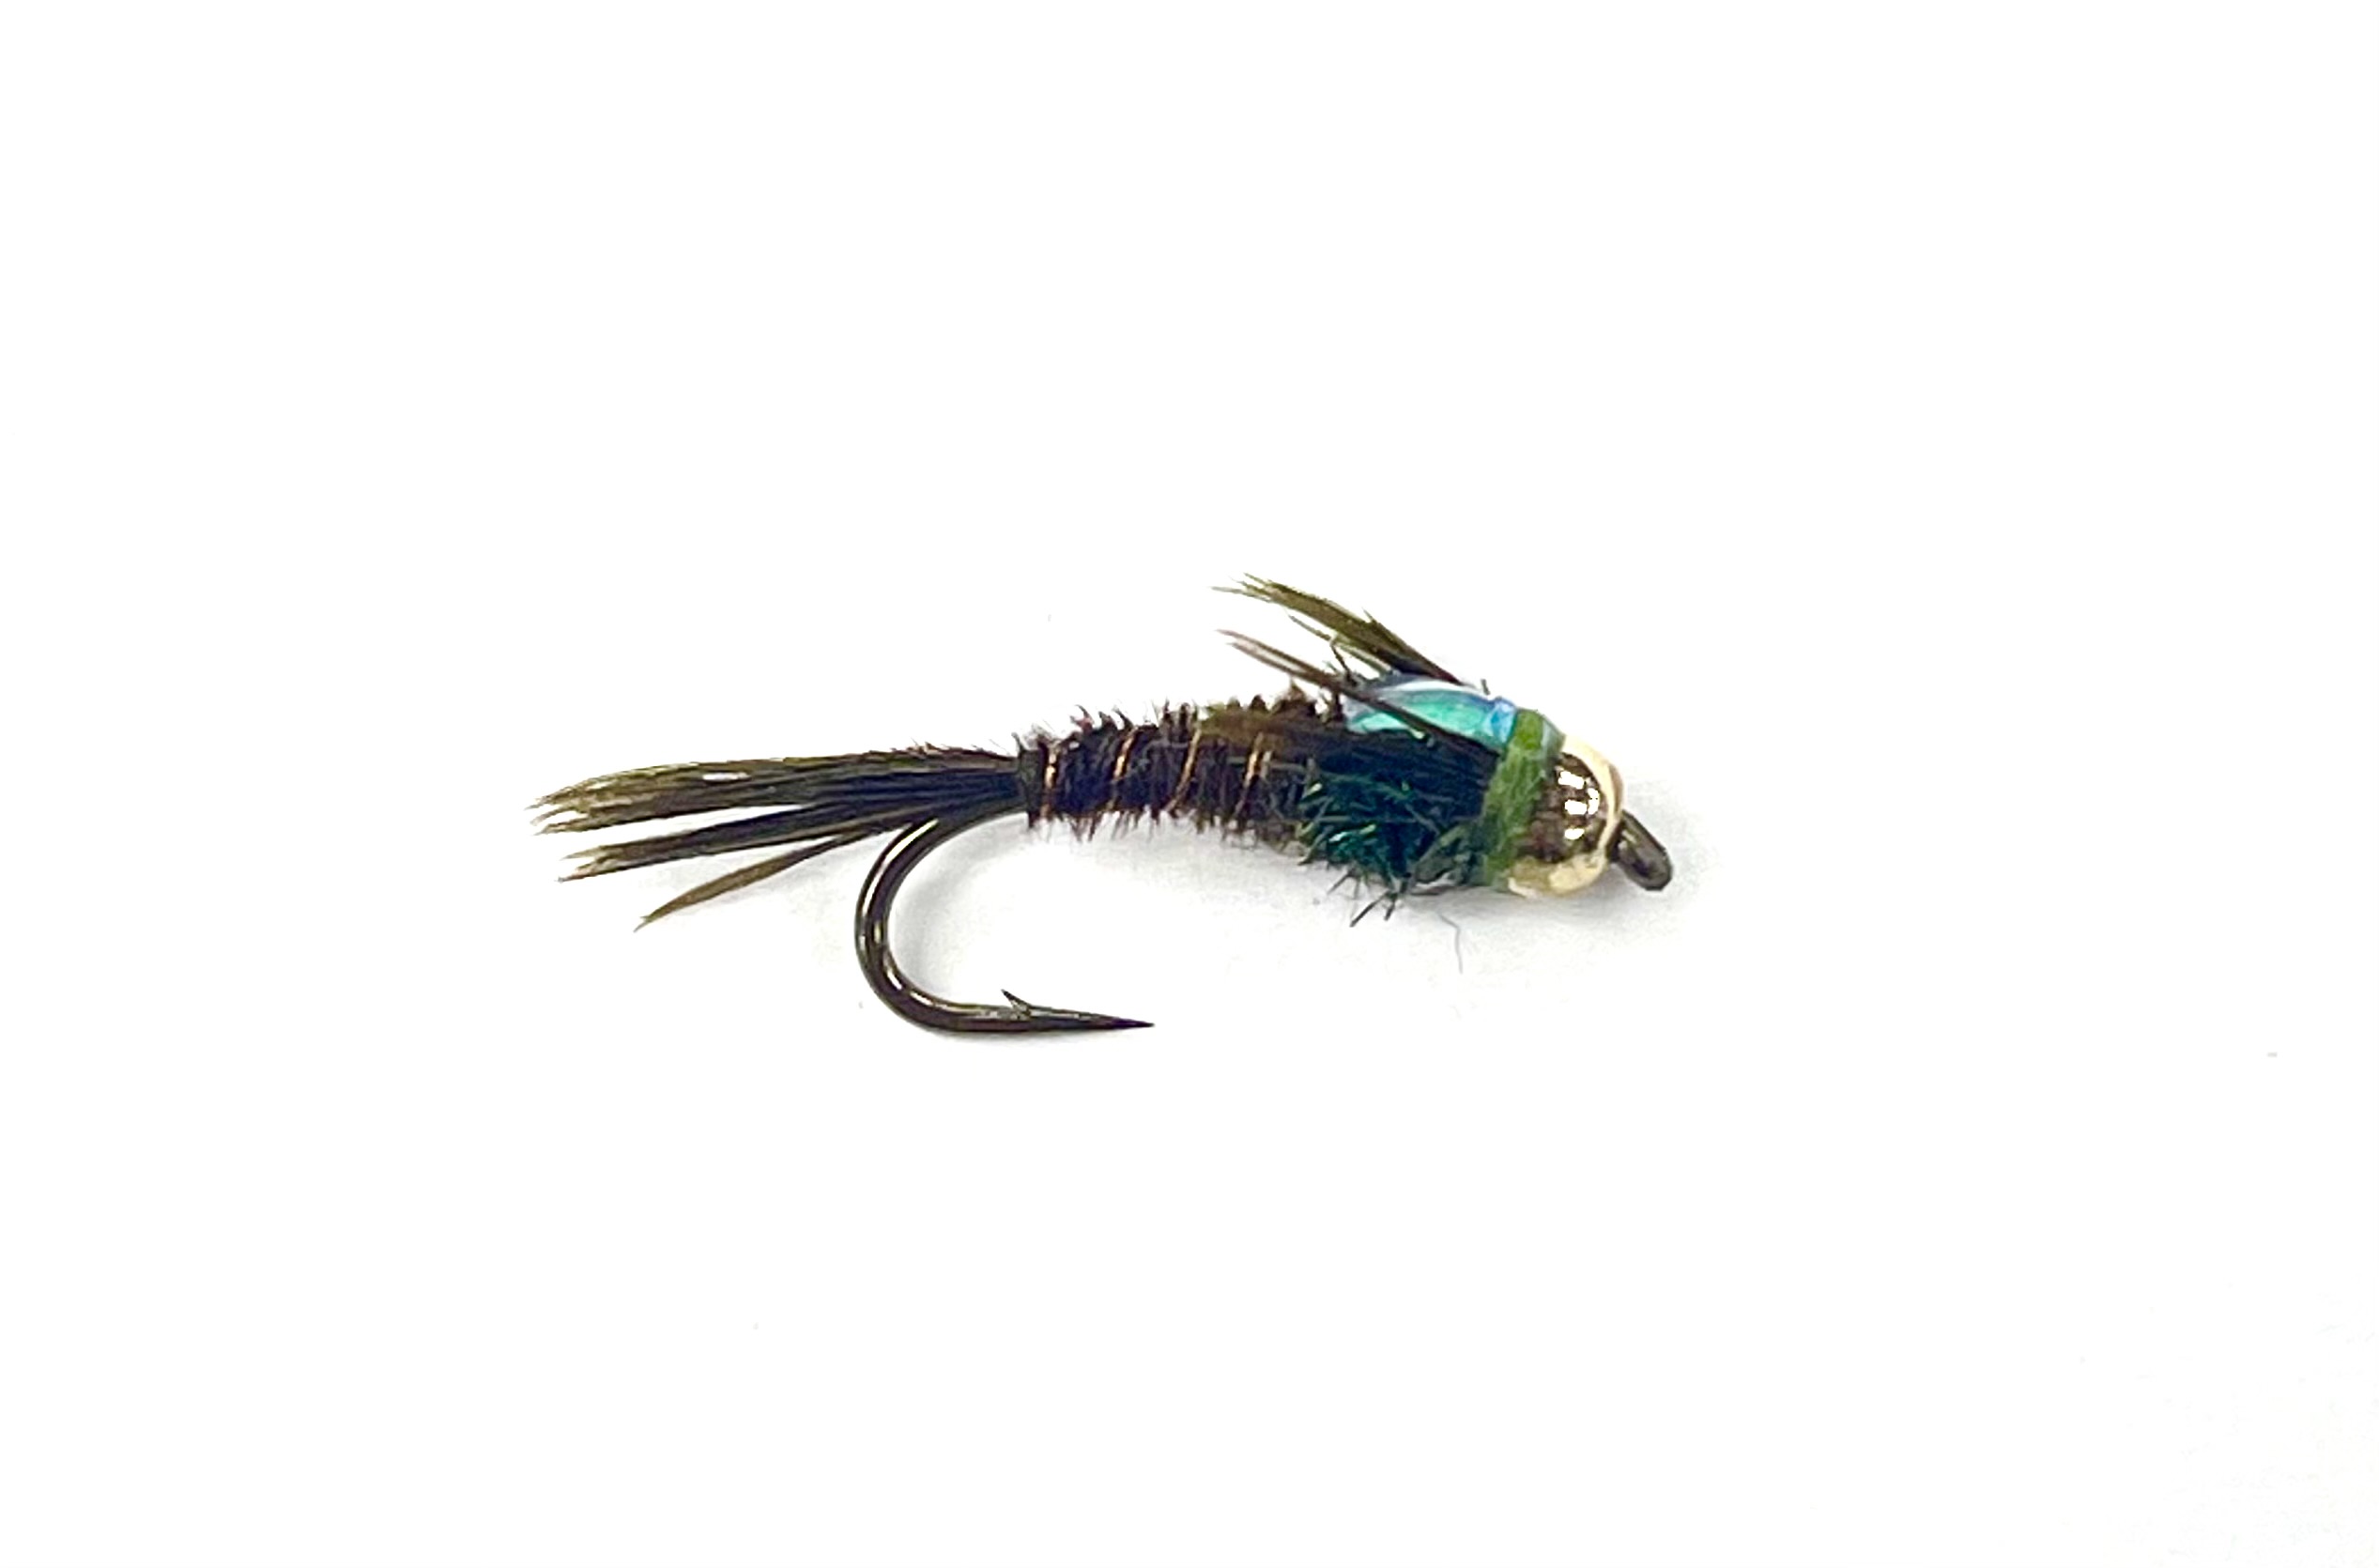 FAD GB Flashback Pheasant Tail Nymph - Olive - Size 14